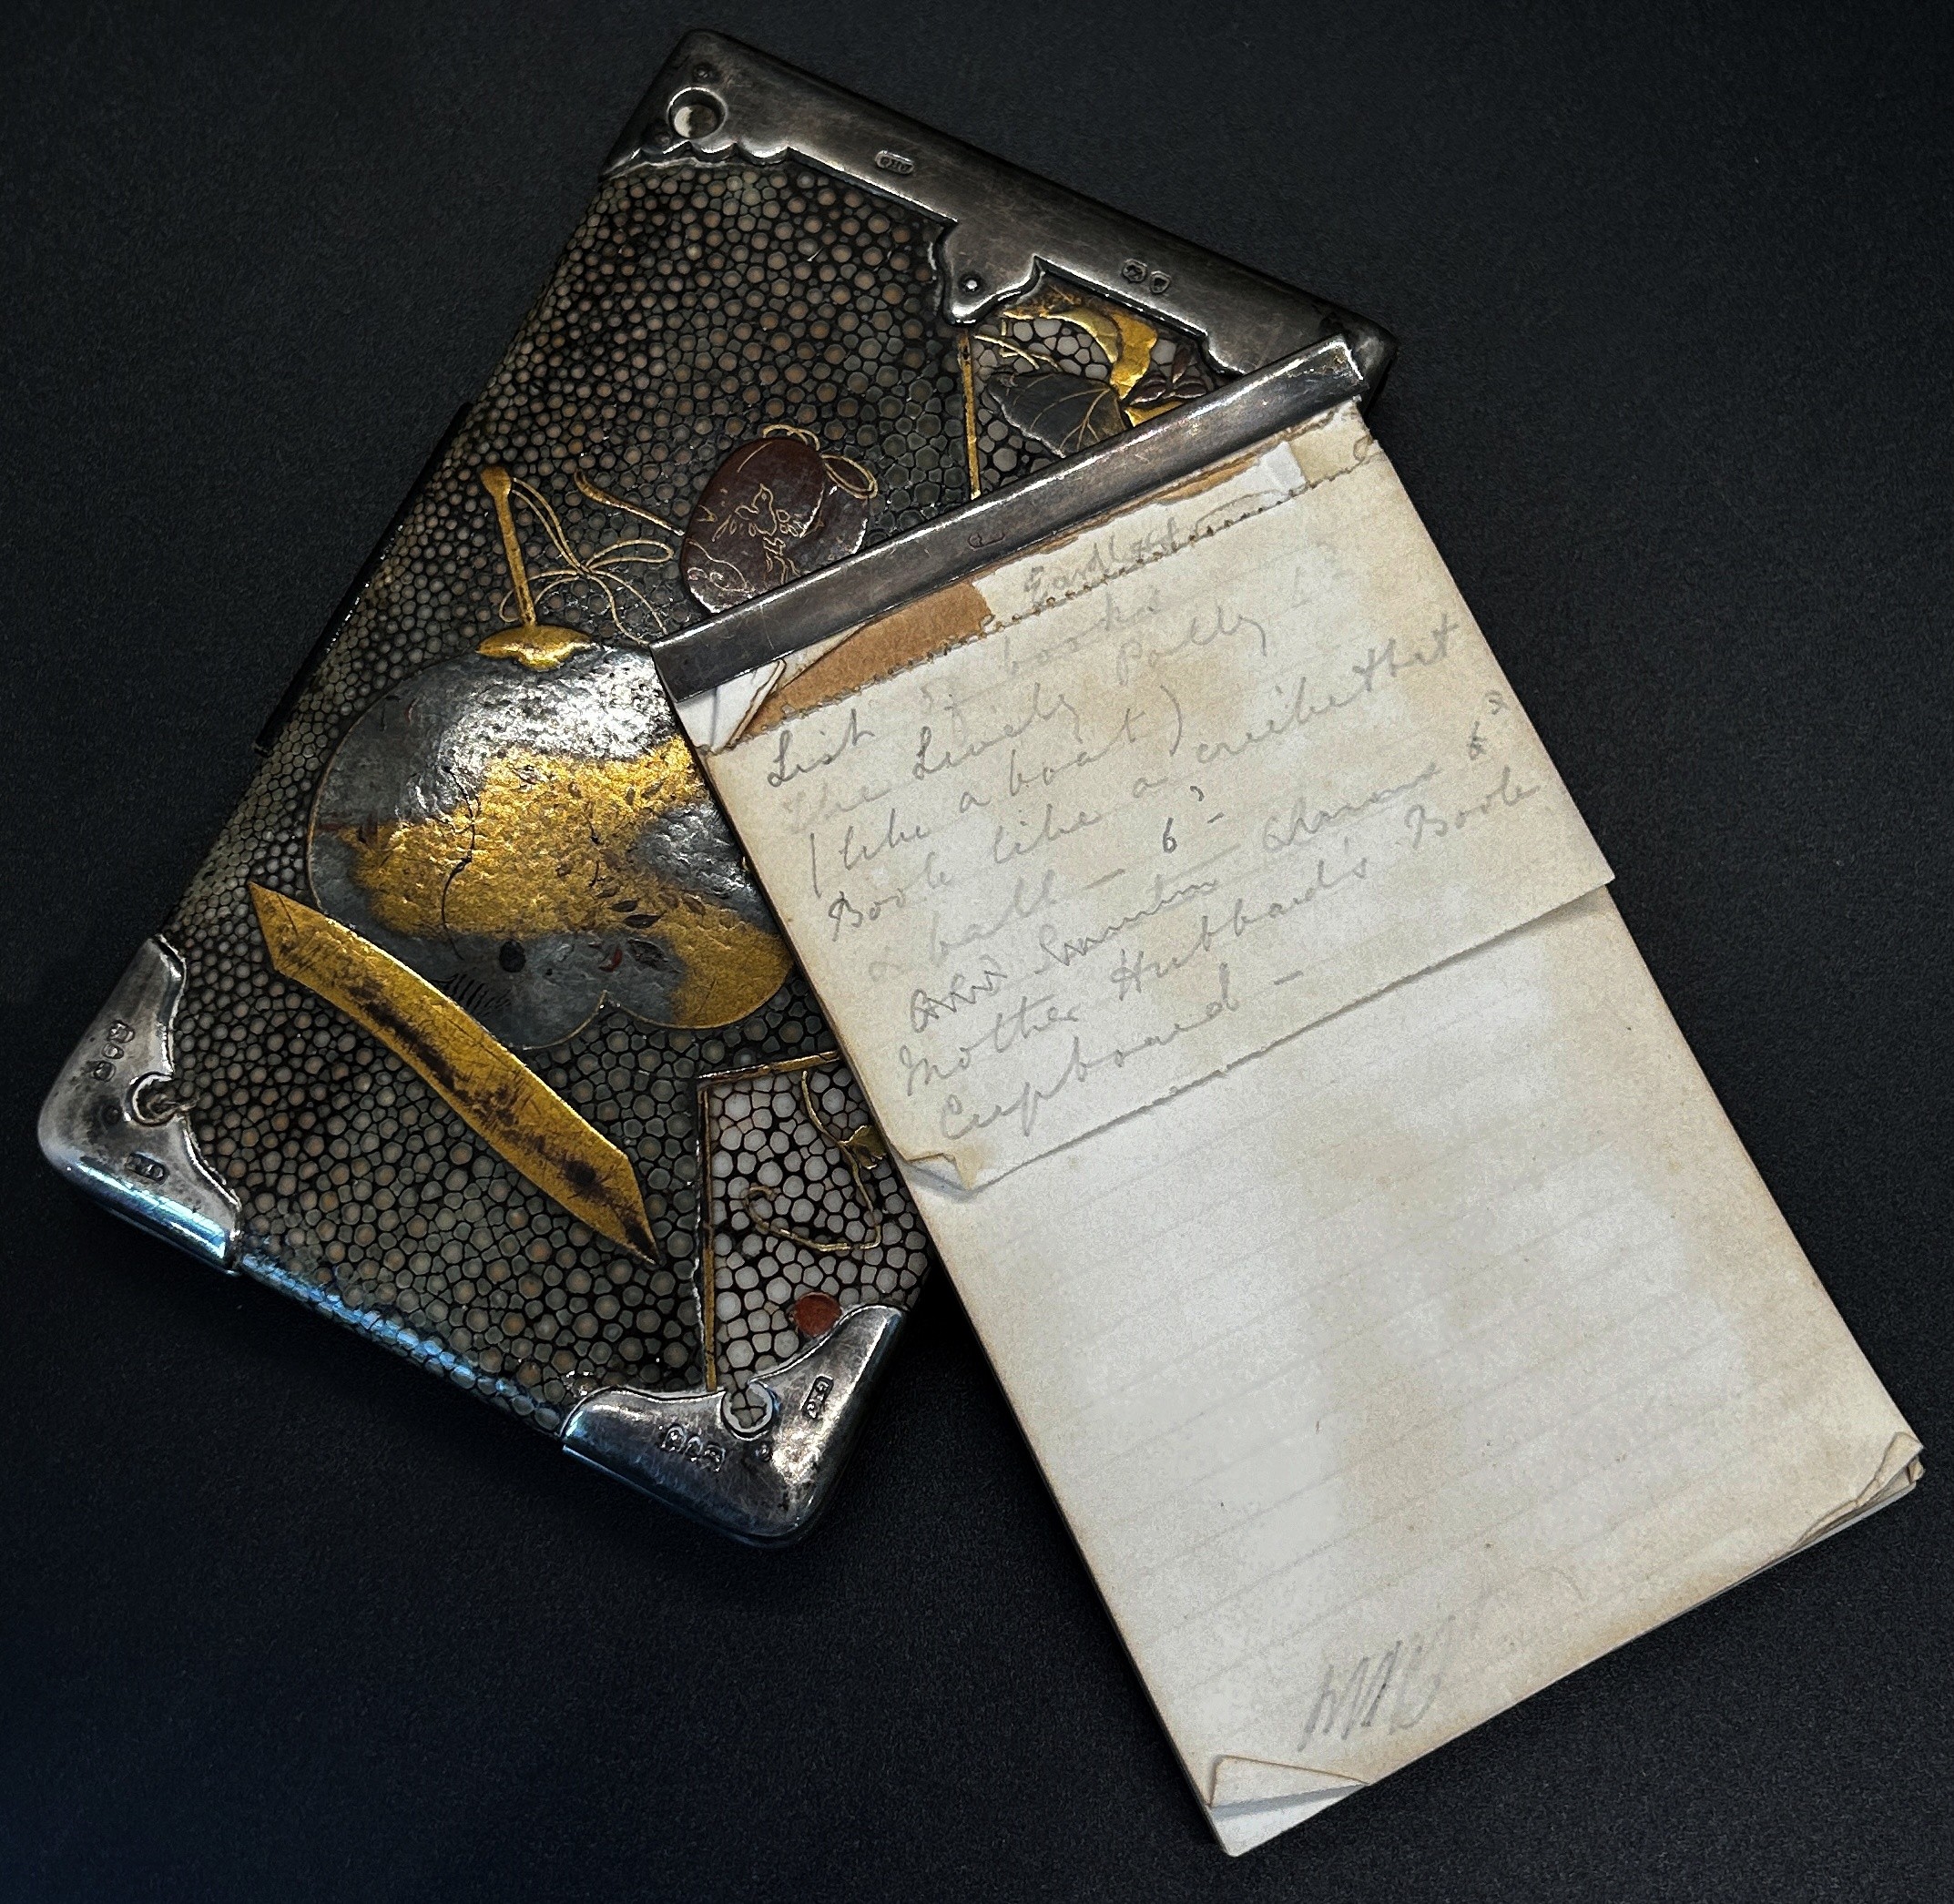 A Victorian shagreen notebook, the covers with Aesthetic Movement influence, soft divisional